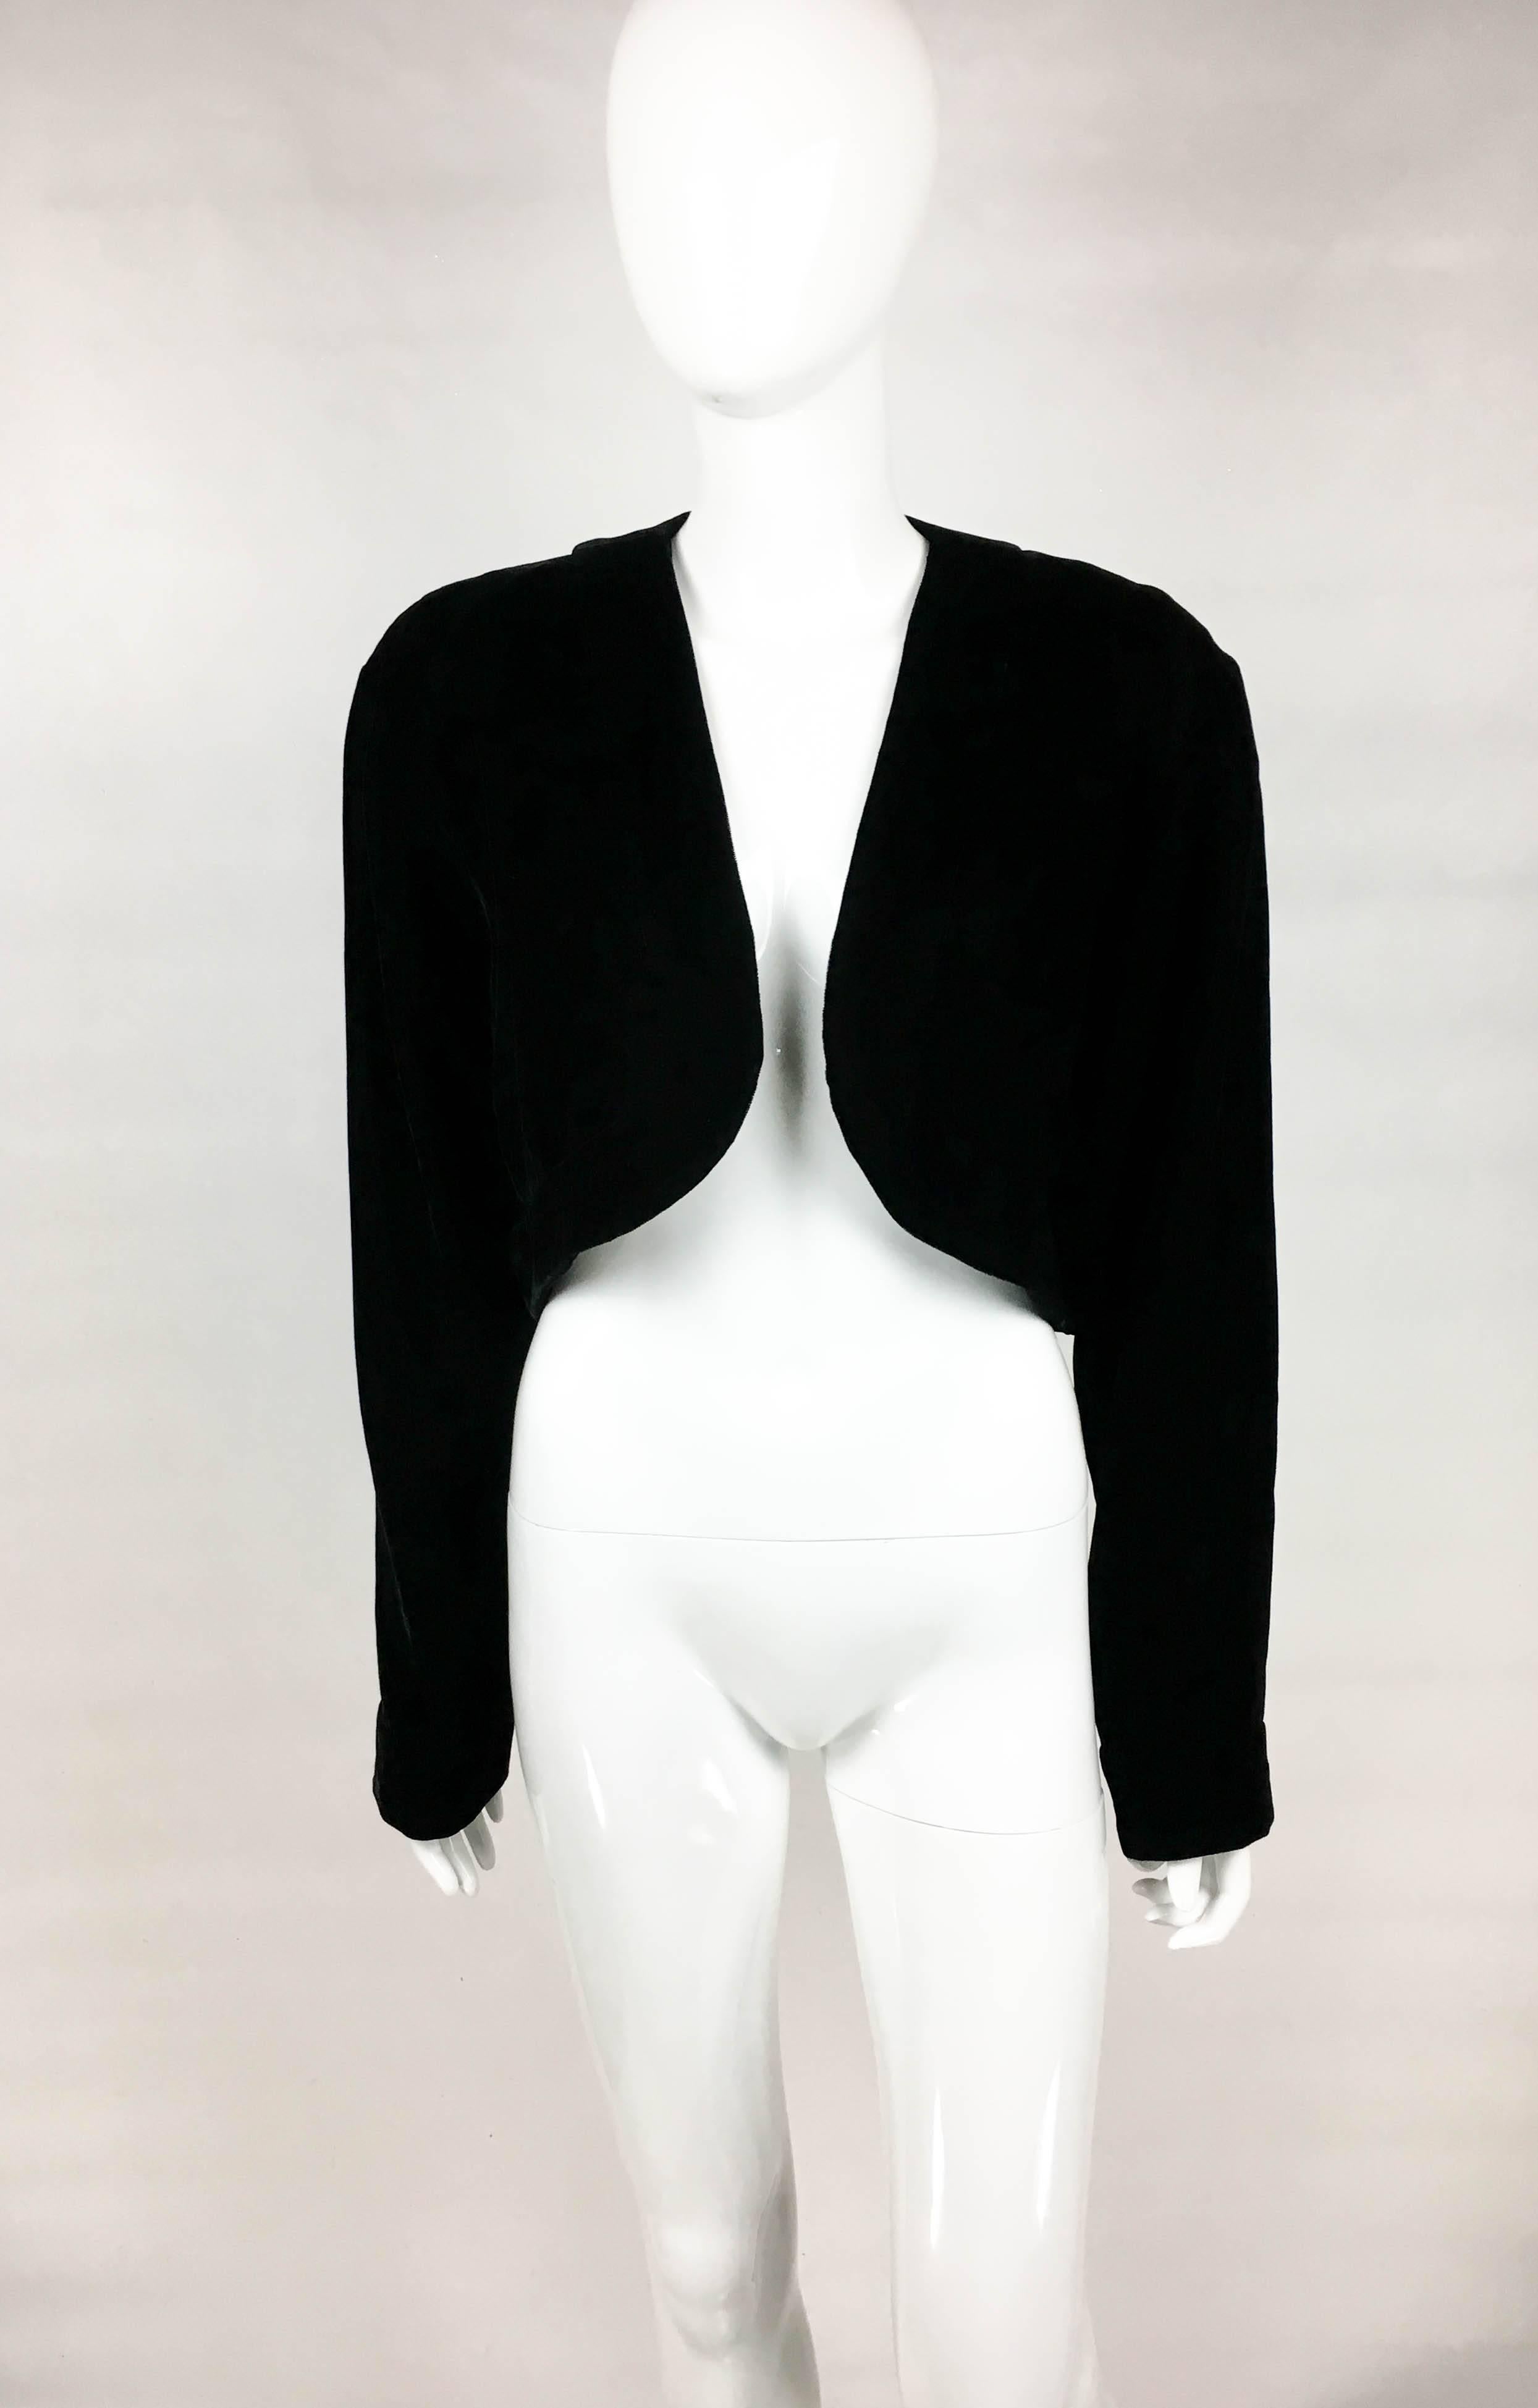 Vintage Lanvin Black Velvet Bolero Jacket. This stylish piece by Lanvin dates back from the 1990’s. Made in black velvet, this elegant jacket features clean, simple lines and no closure to the front. Lined. 

Label / Designer: Lanvin

Period: